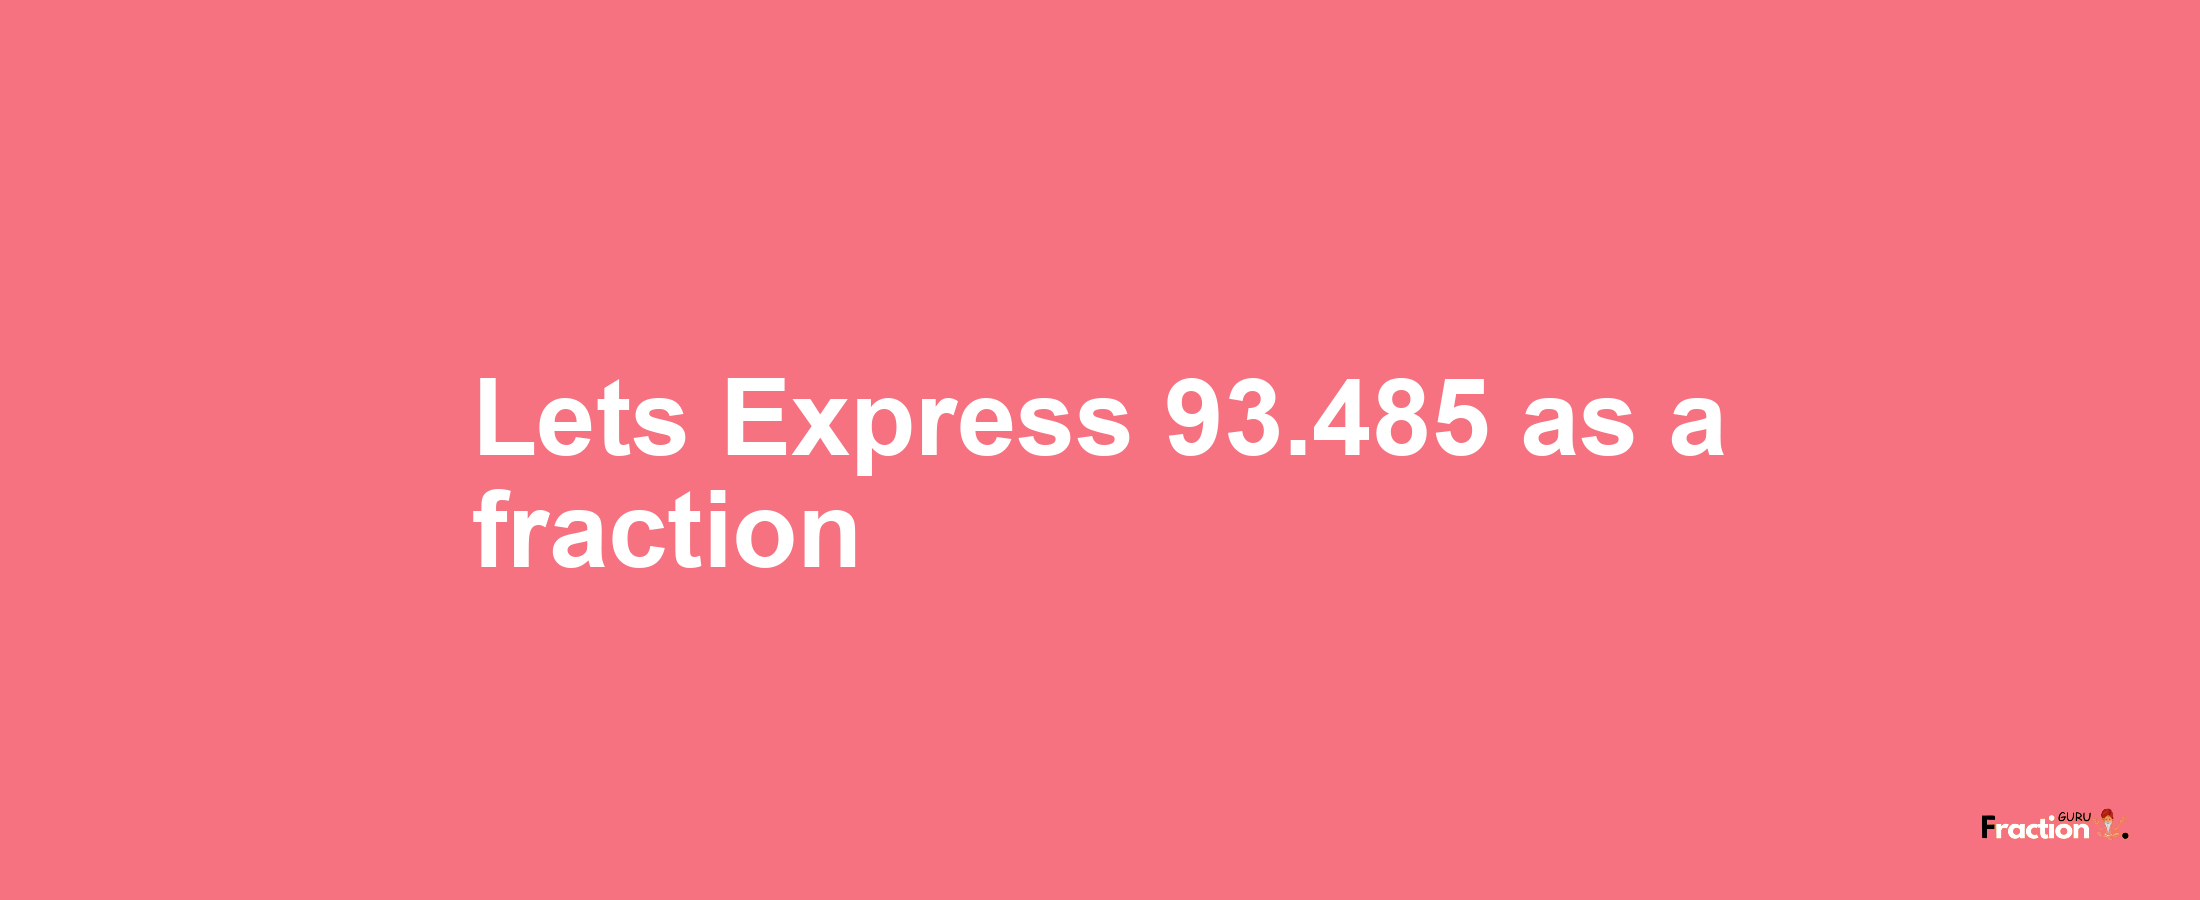 Lets Express 93.485 as afraction